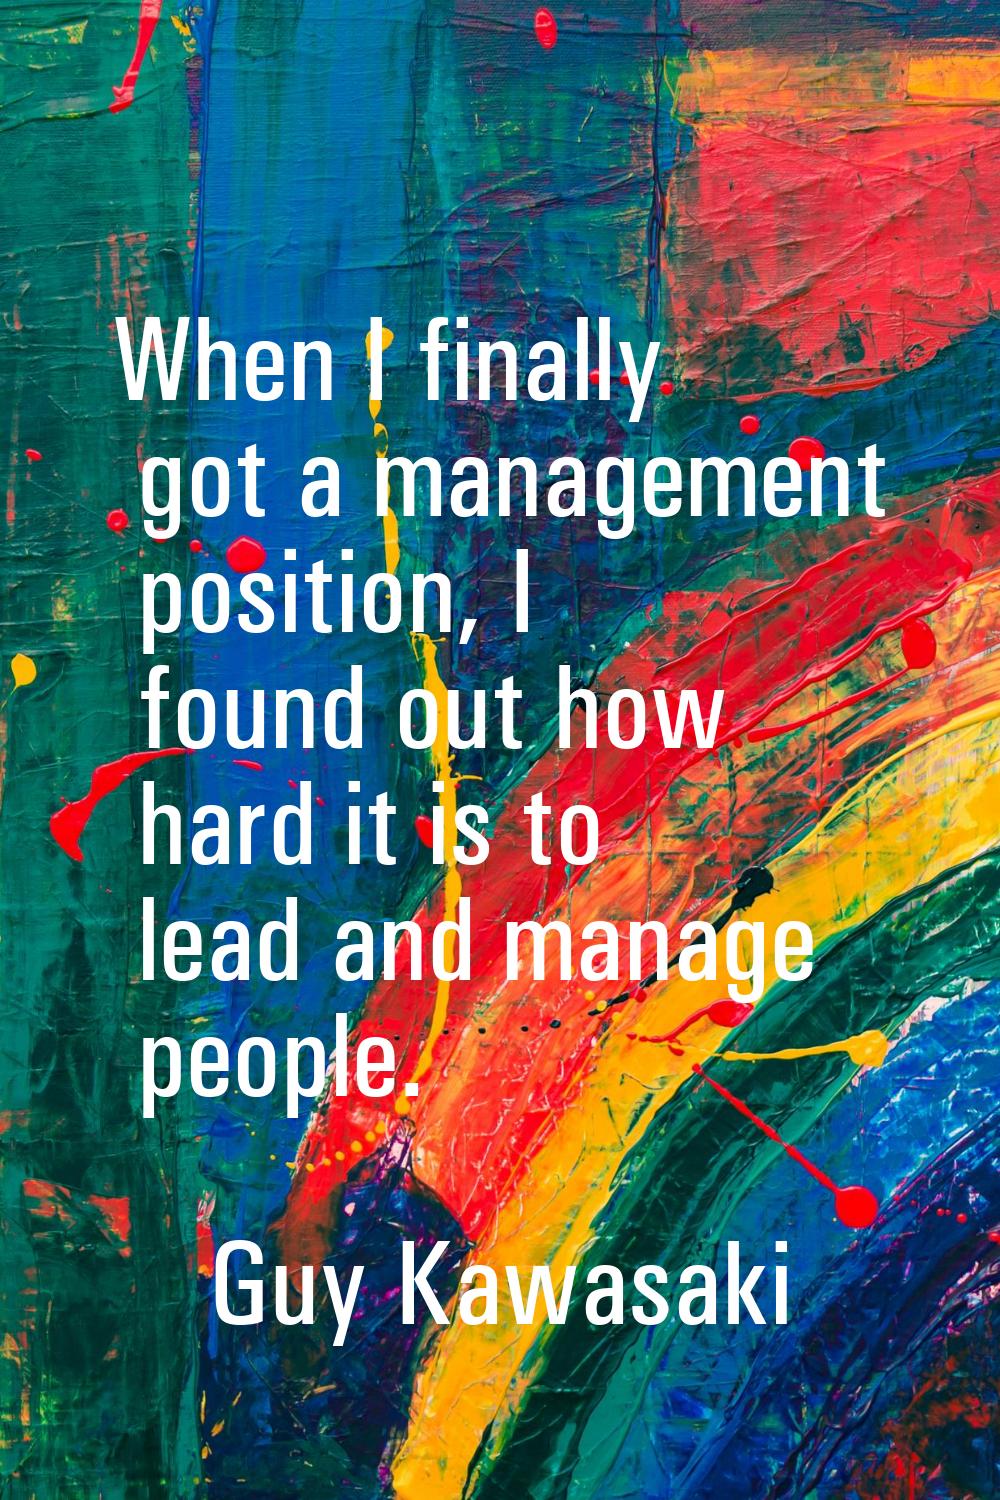 When I finally got a management position, I found out how hard it is to lead and manage people.